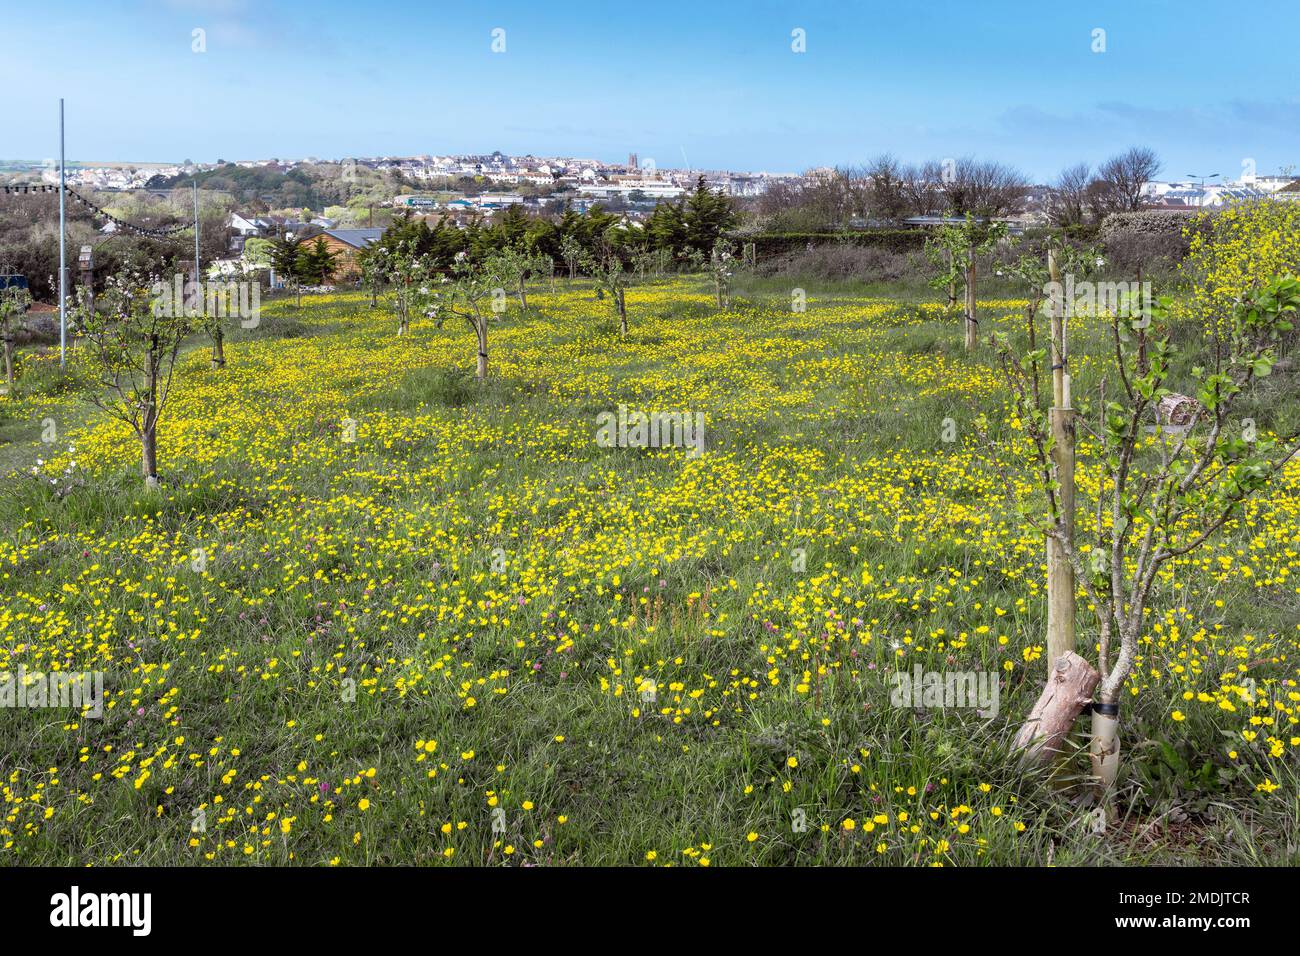 Wild flowers growing in a grassy area in Newquay Orchard a community initiative in Newquay in Cornwall in the UK. Stock Photo